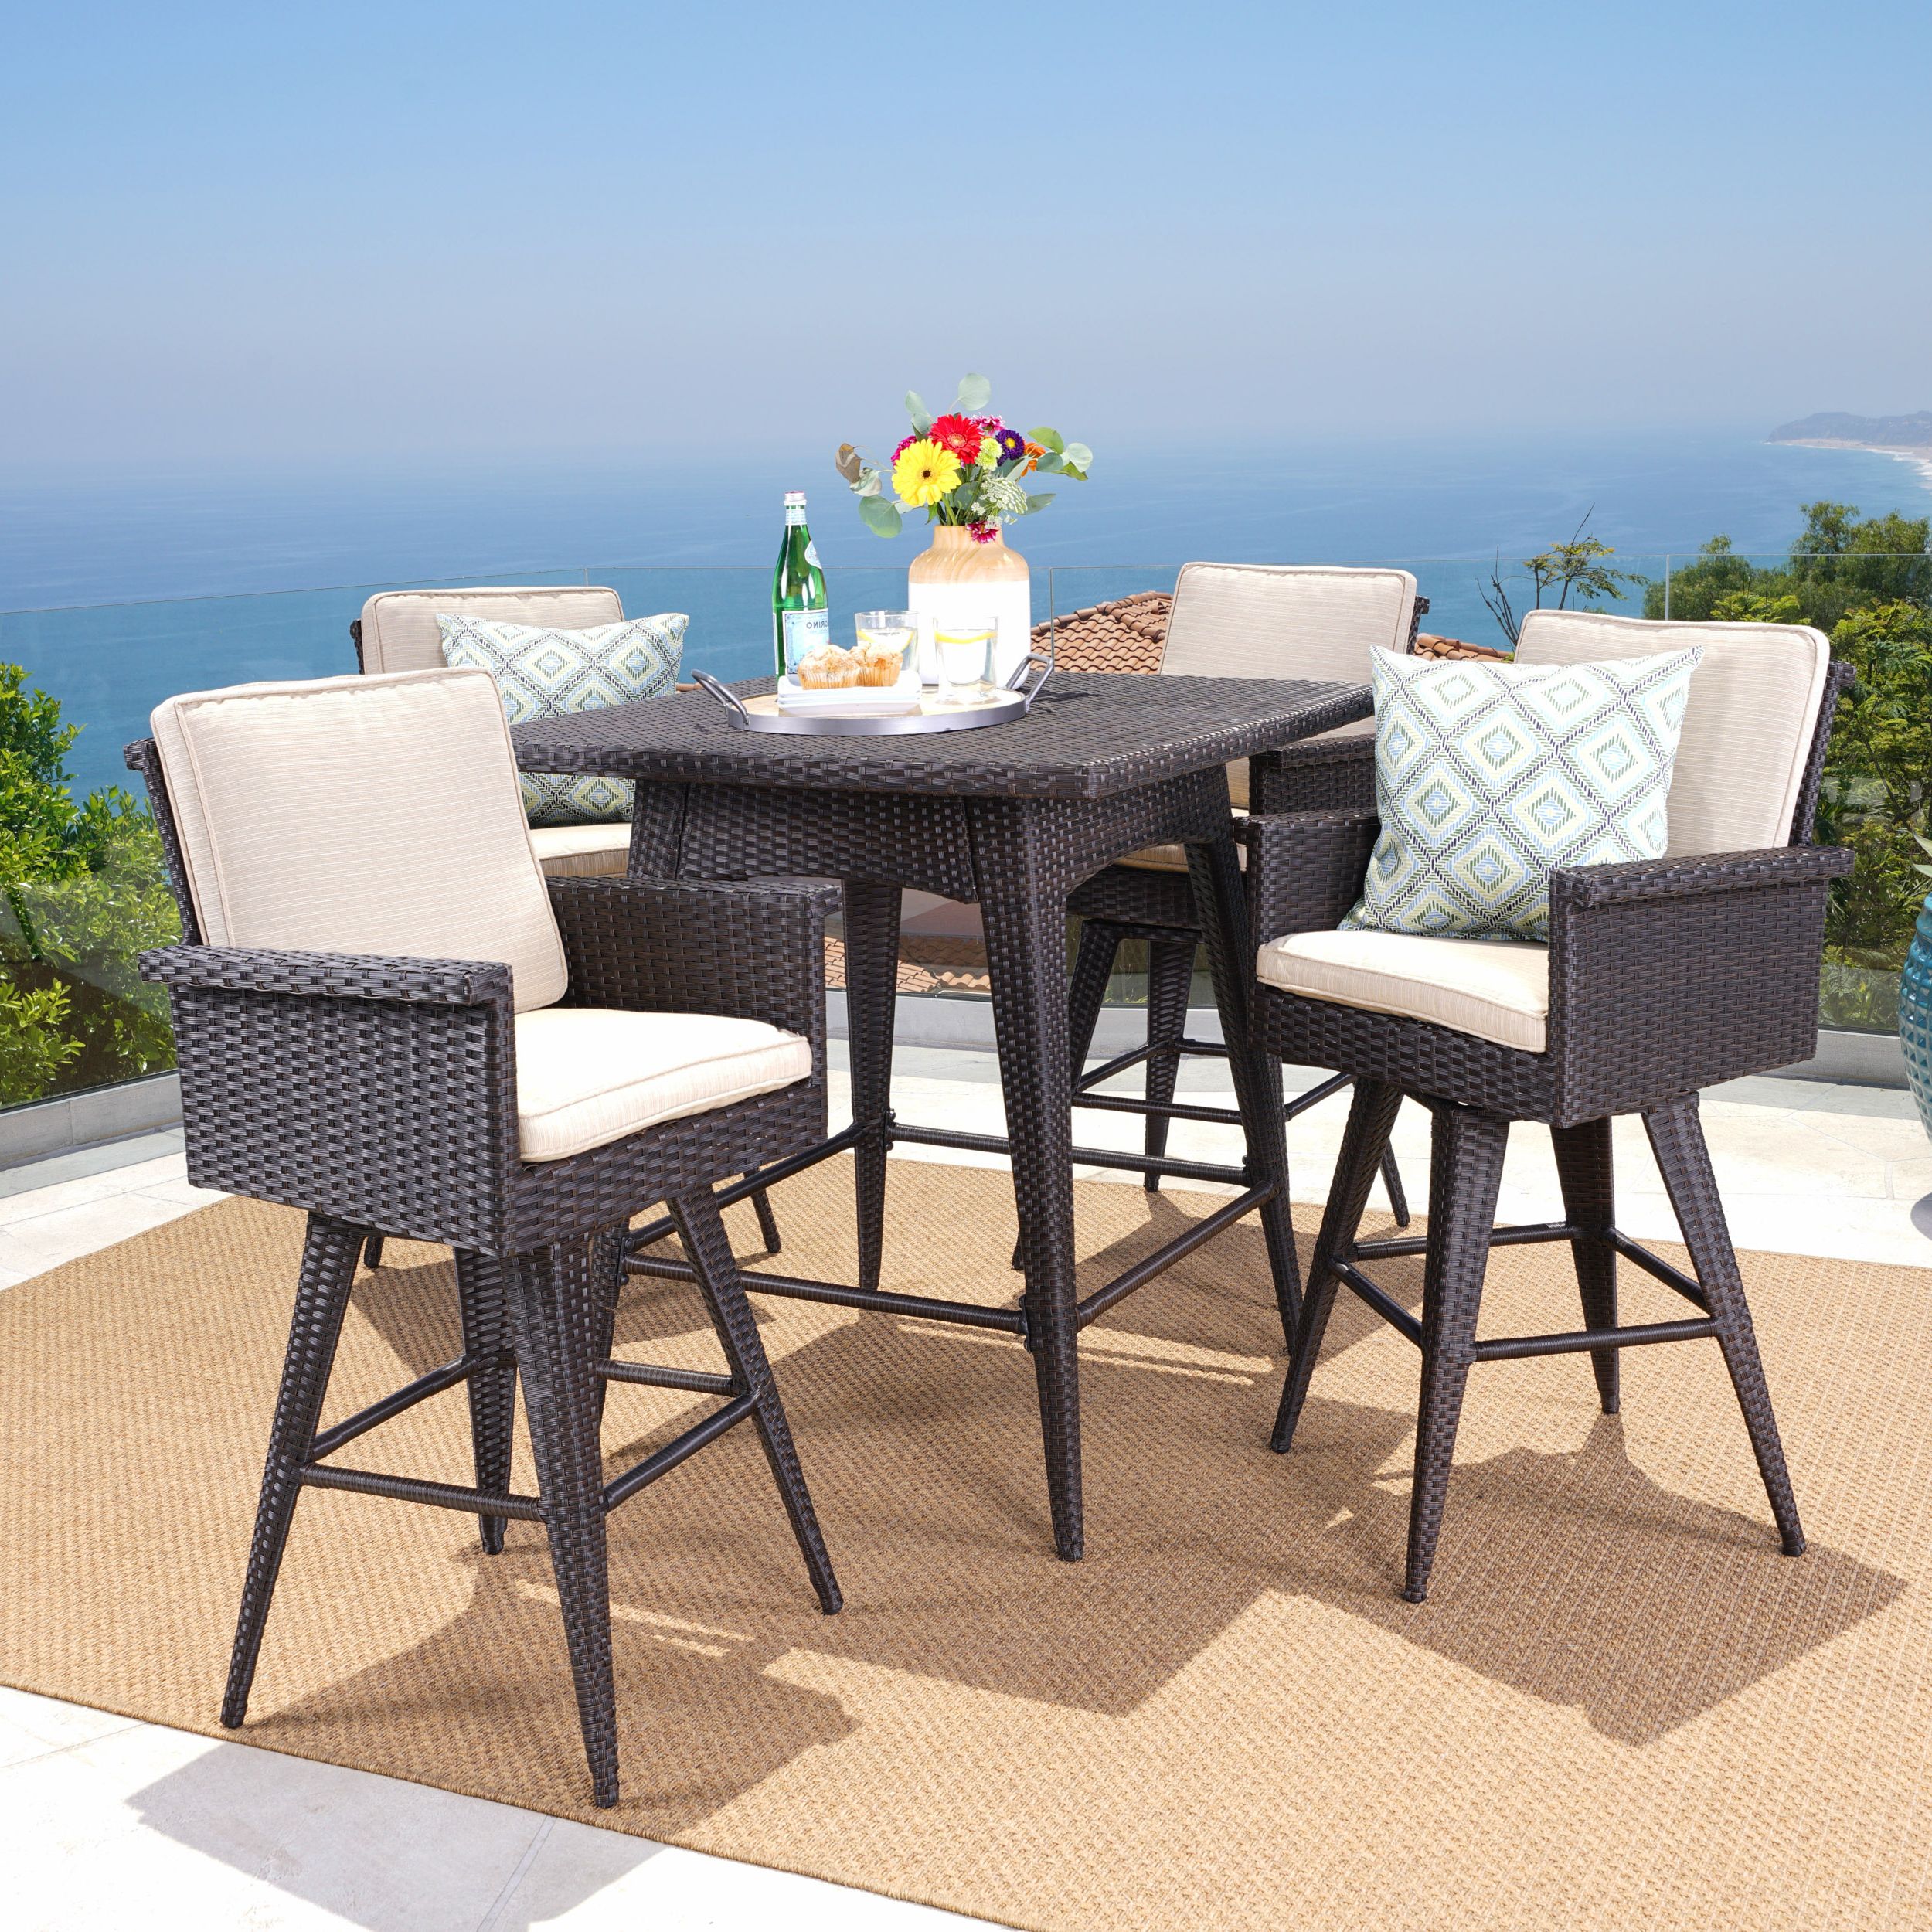 Marianne Outdoor 5 Piece Wicker Bar Height Dining Set With Sunbrella Intended For Most Recent Wicker 5 Piece Round Patio Dining Sets (View 5 of 15)